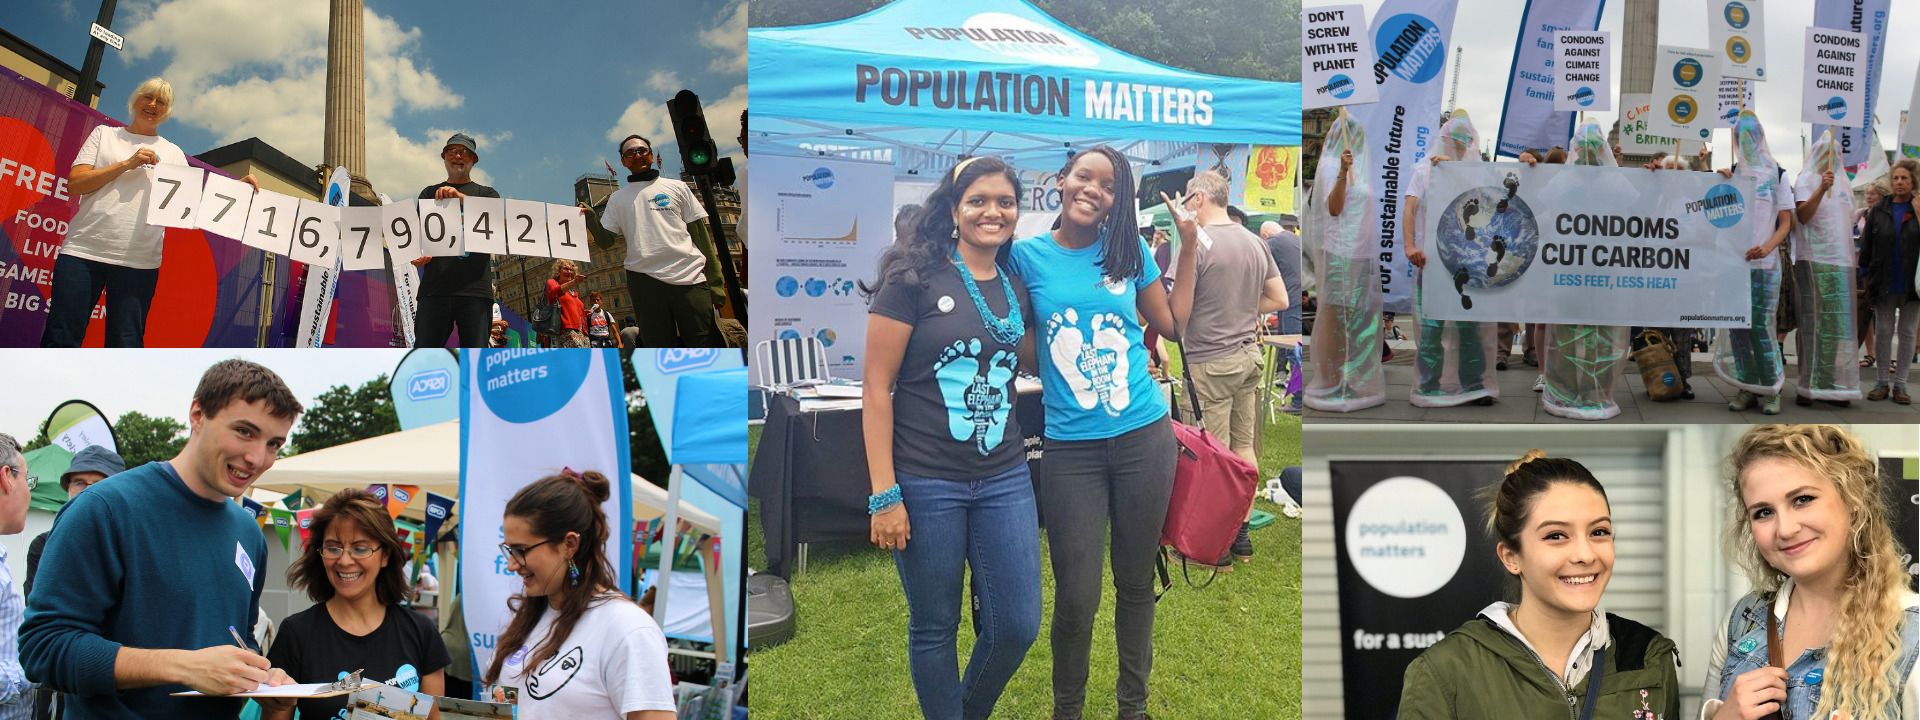 Championing better choices: My work as a young population activist